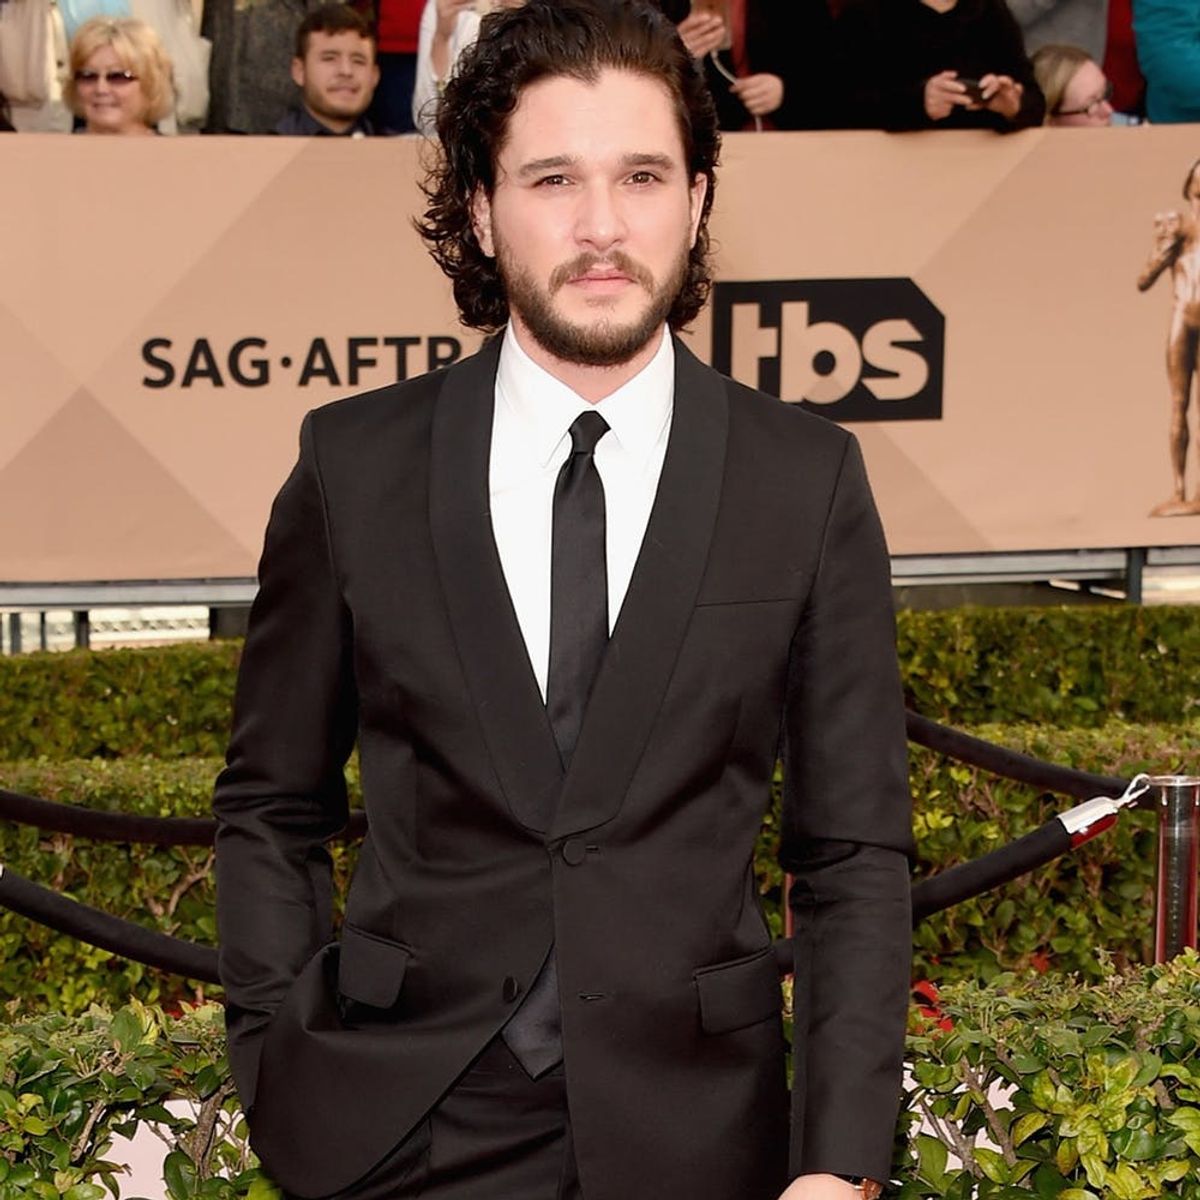 Kit Harrington Just Shared a Spoiler About Next Season of Game of Thrones